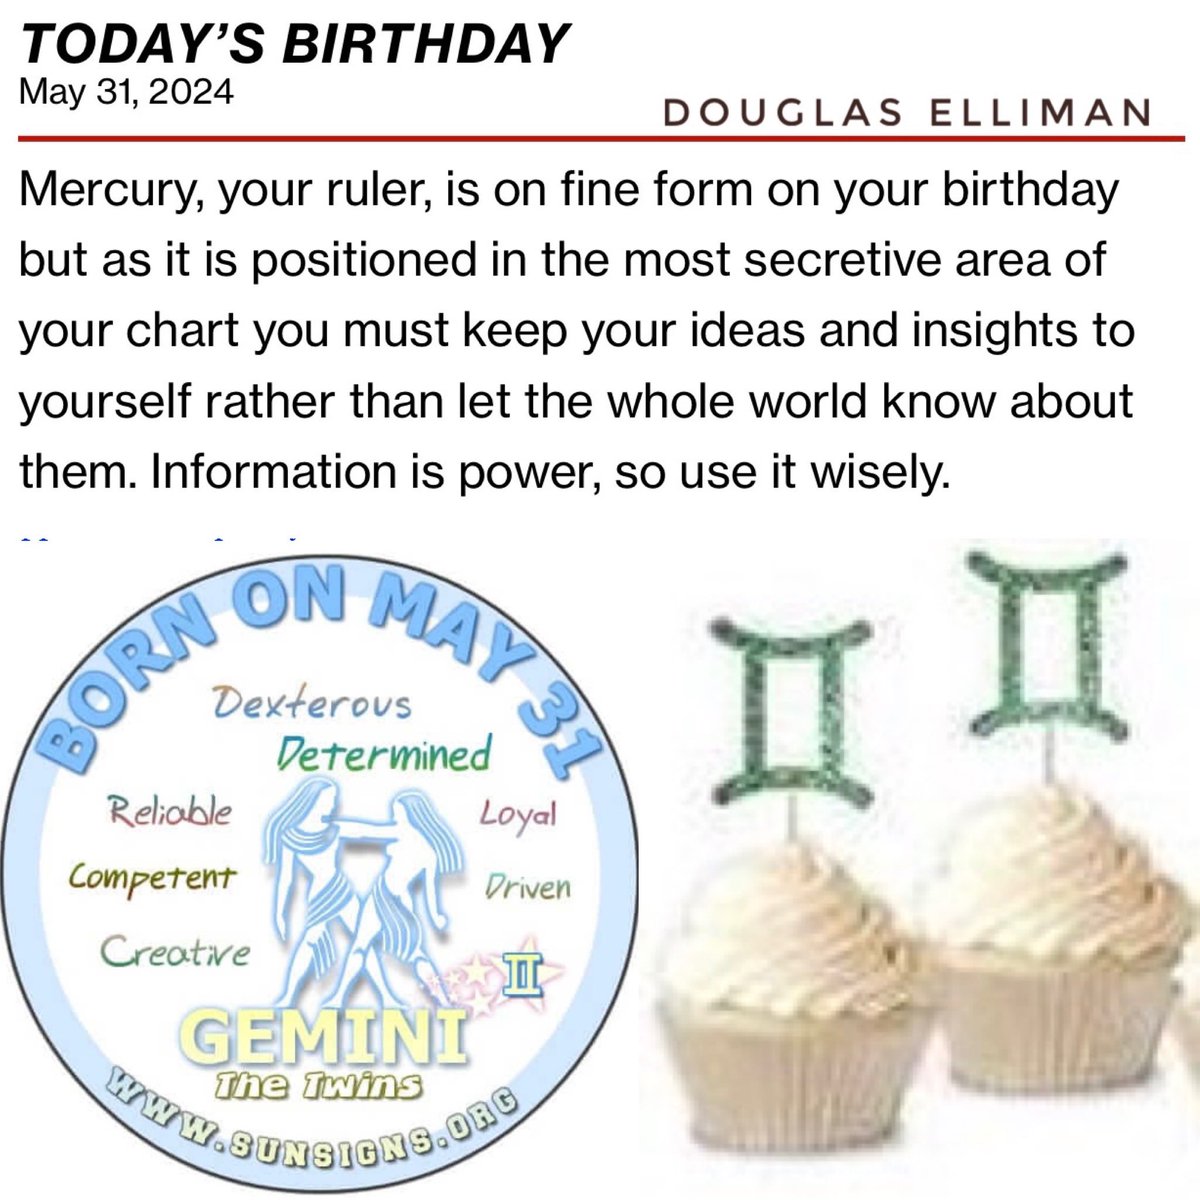 For everyone celebrating a #Birthday today, #May31st , check out your Horoscope & enjoy your special day! ♊️ 👯🎉🎈🎂🎊🎁🥂🍾👏🏻👏🏻👏🏻👏🏻👏🏻#happybirthday #Gemini #Horoscope #happybirthdaytoyou #HappySpring #HappyMonthOfMay
@DouglasElliman 

facebook.com/share/r/irwaNP…